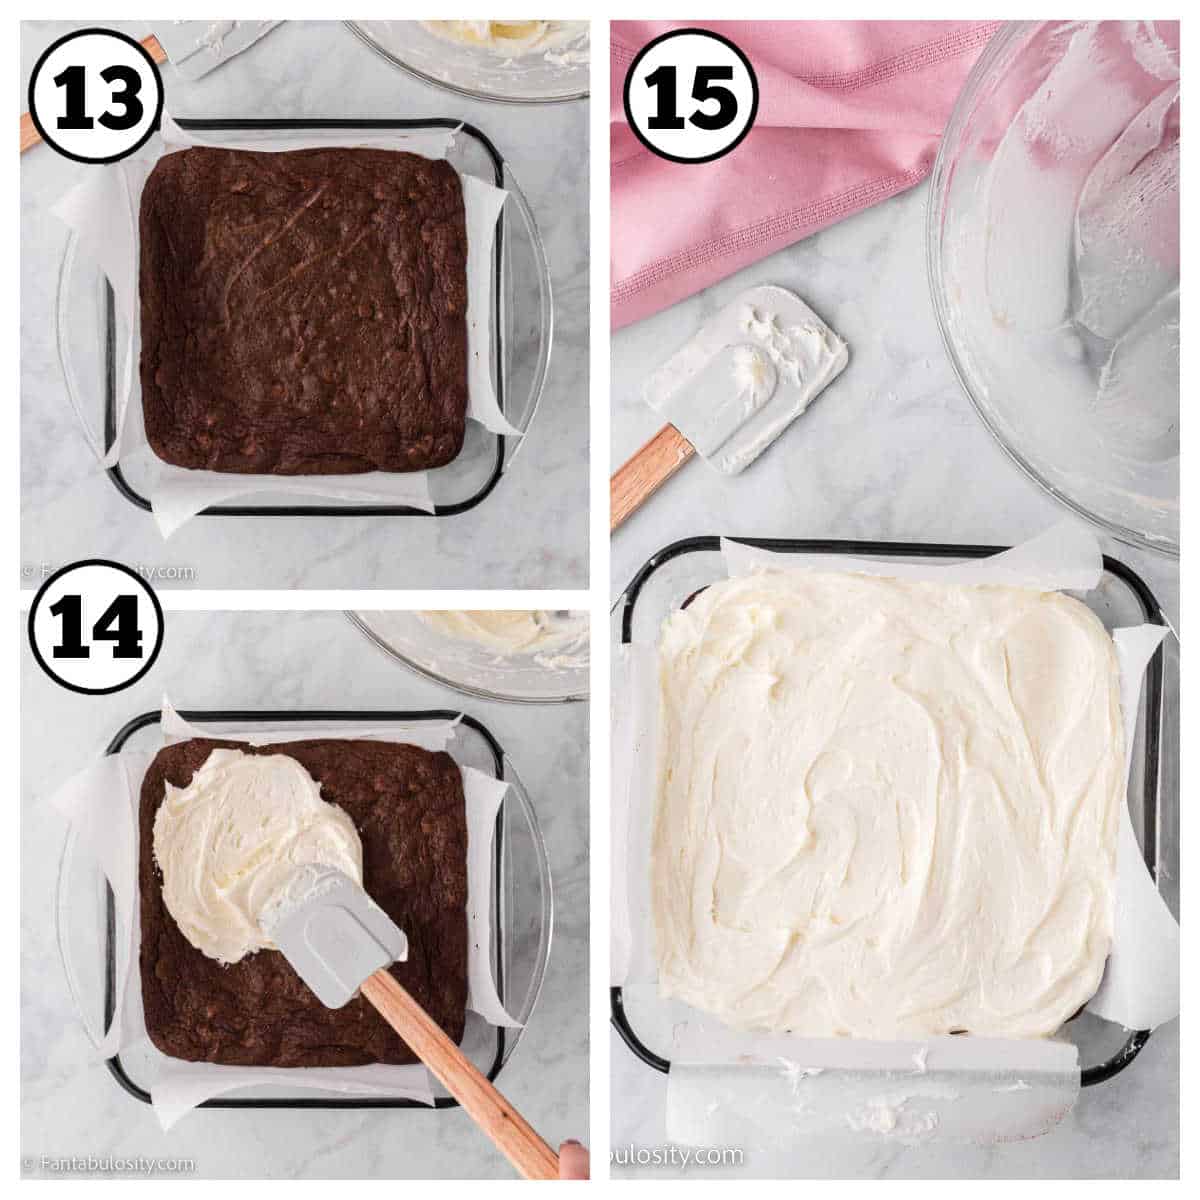 Steps 13-15 how to frosting brownies with cream cheese frosting.